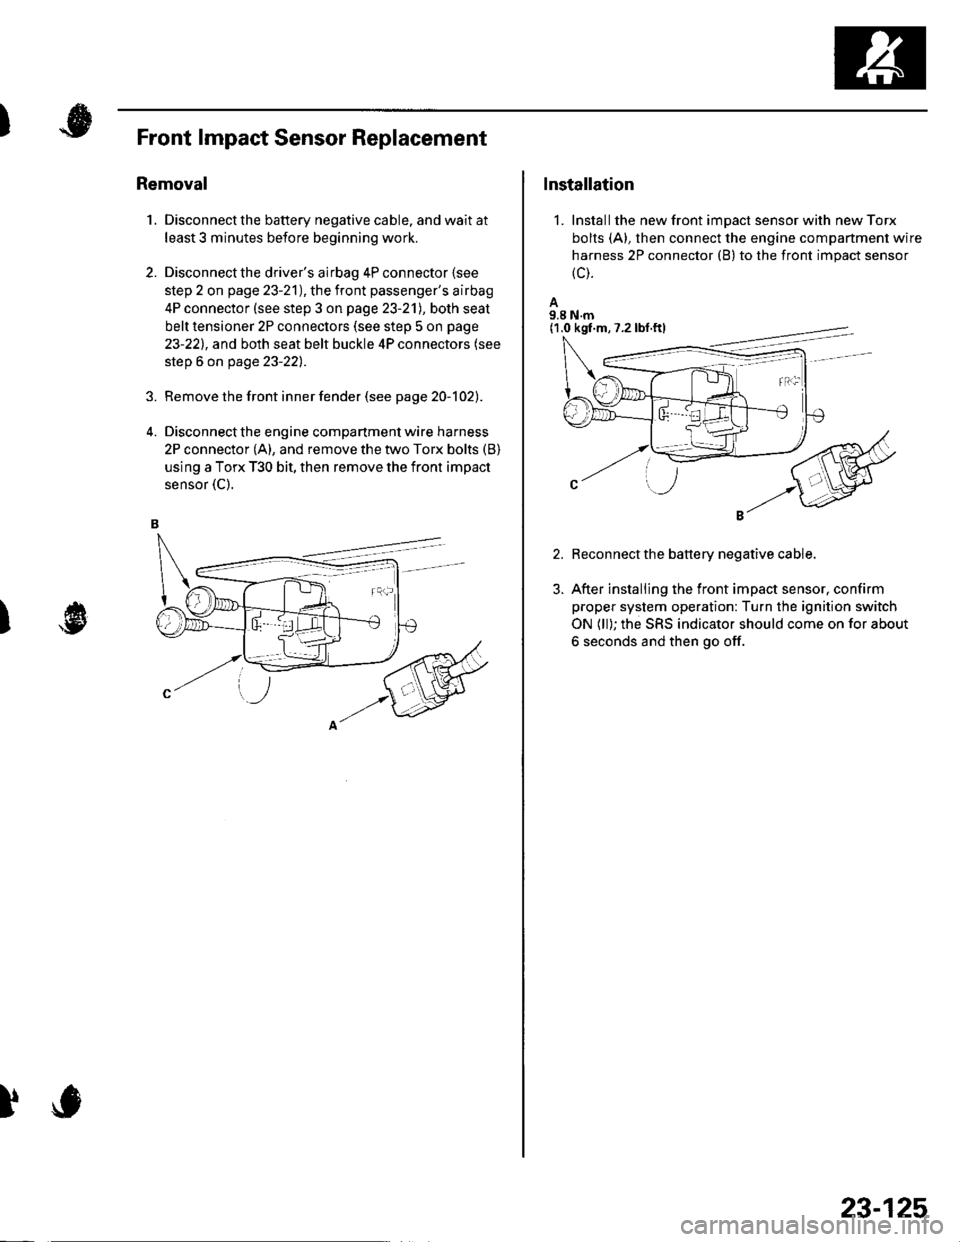 HONDA CIVIC 2003 7.G Workshop Manual )
1.
Front lmpact Sensor Replacement
Removal
Disconnect the battery negative cable. and wait at
least 3 minutes before beginning work.
Disconnect the drivers airbag 4P connector lsee
step 2 on page 2